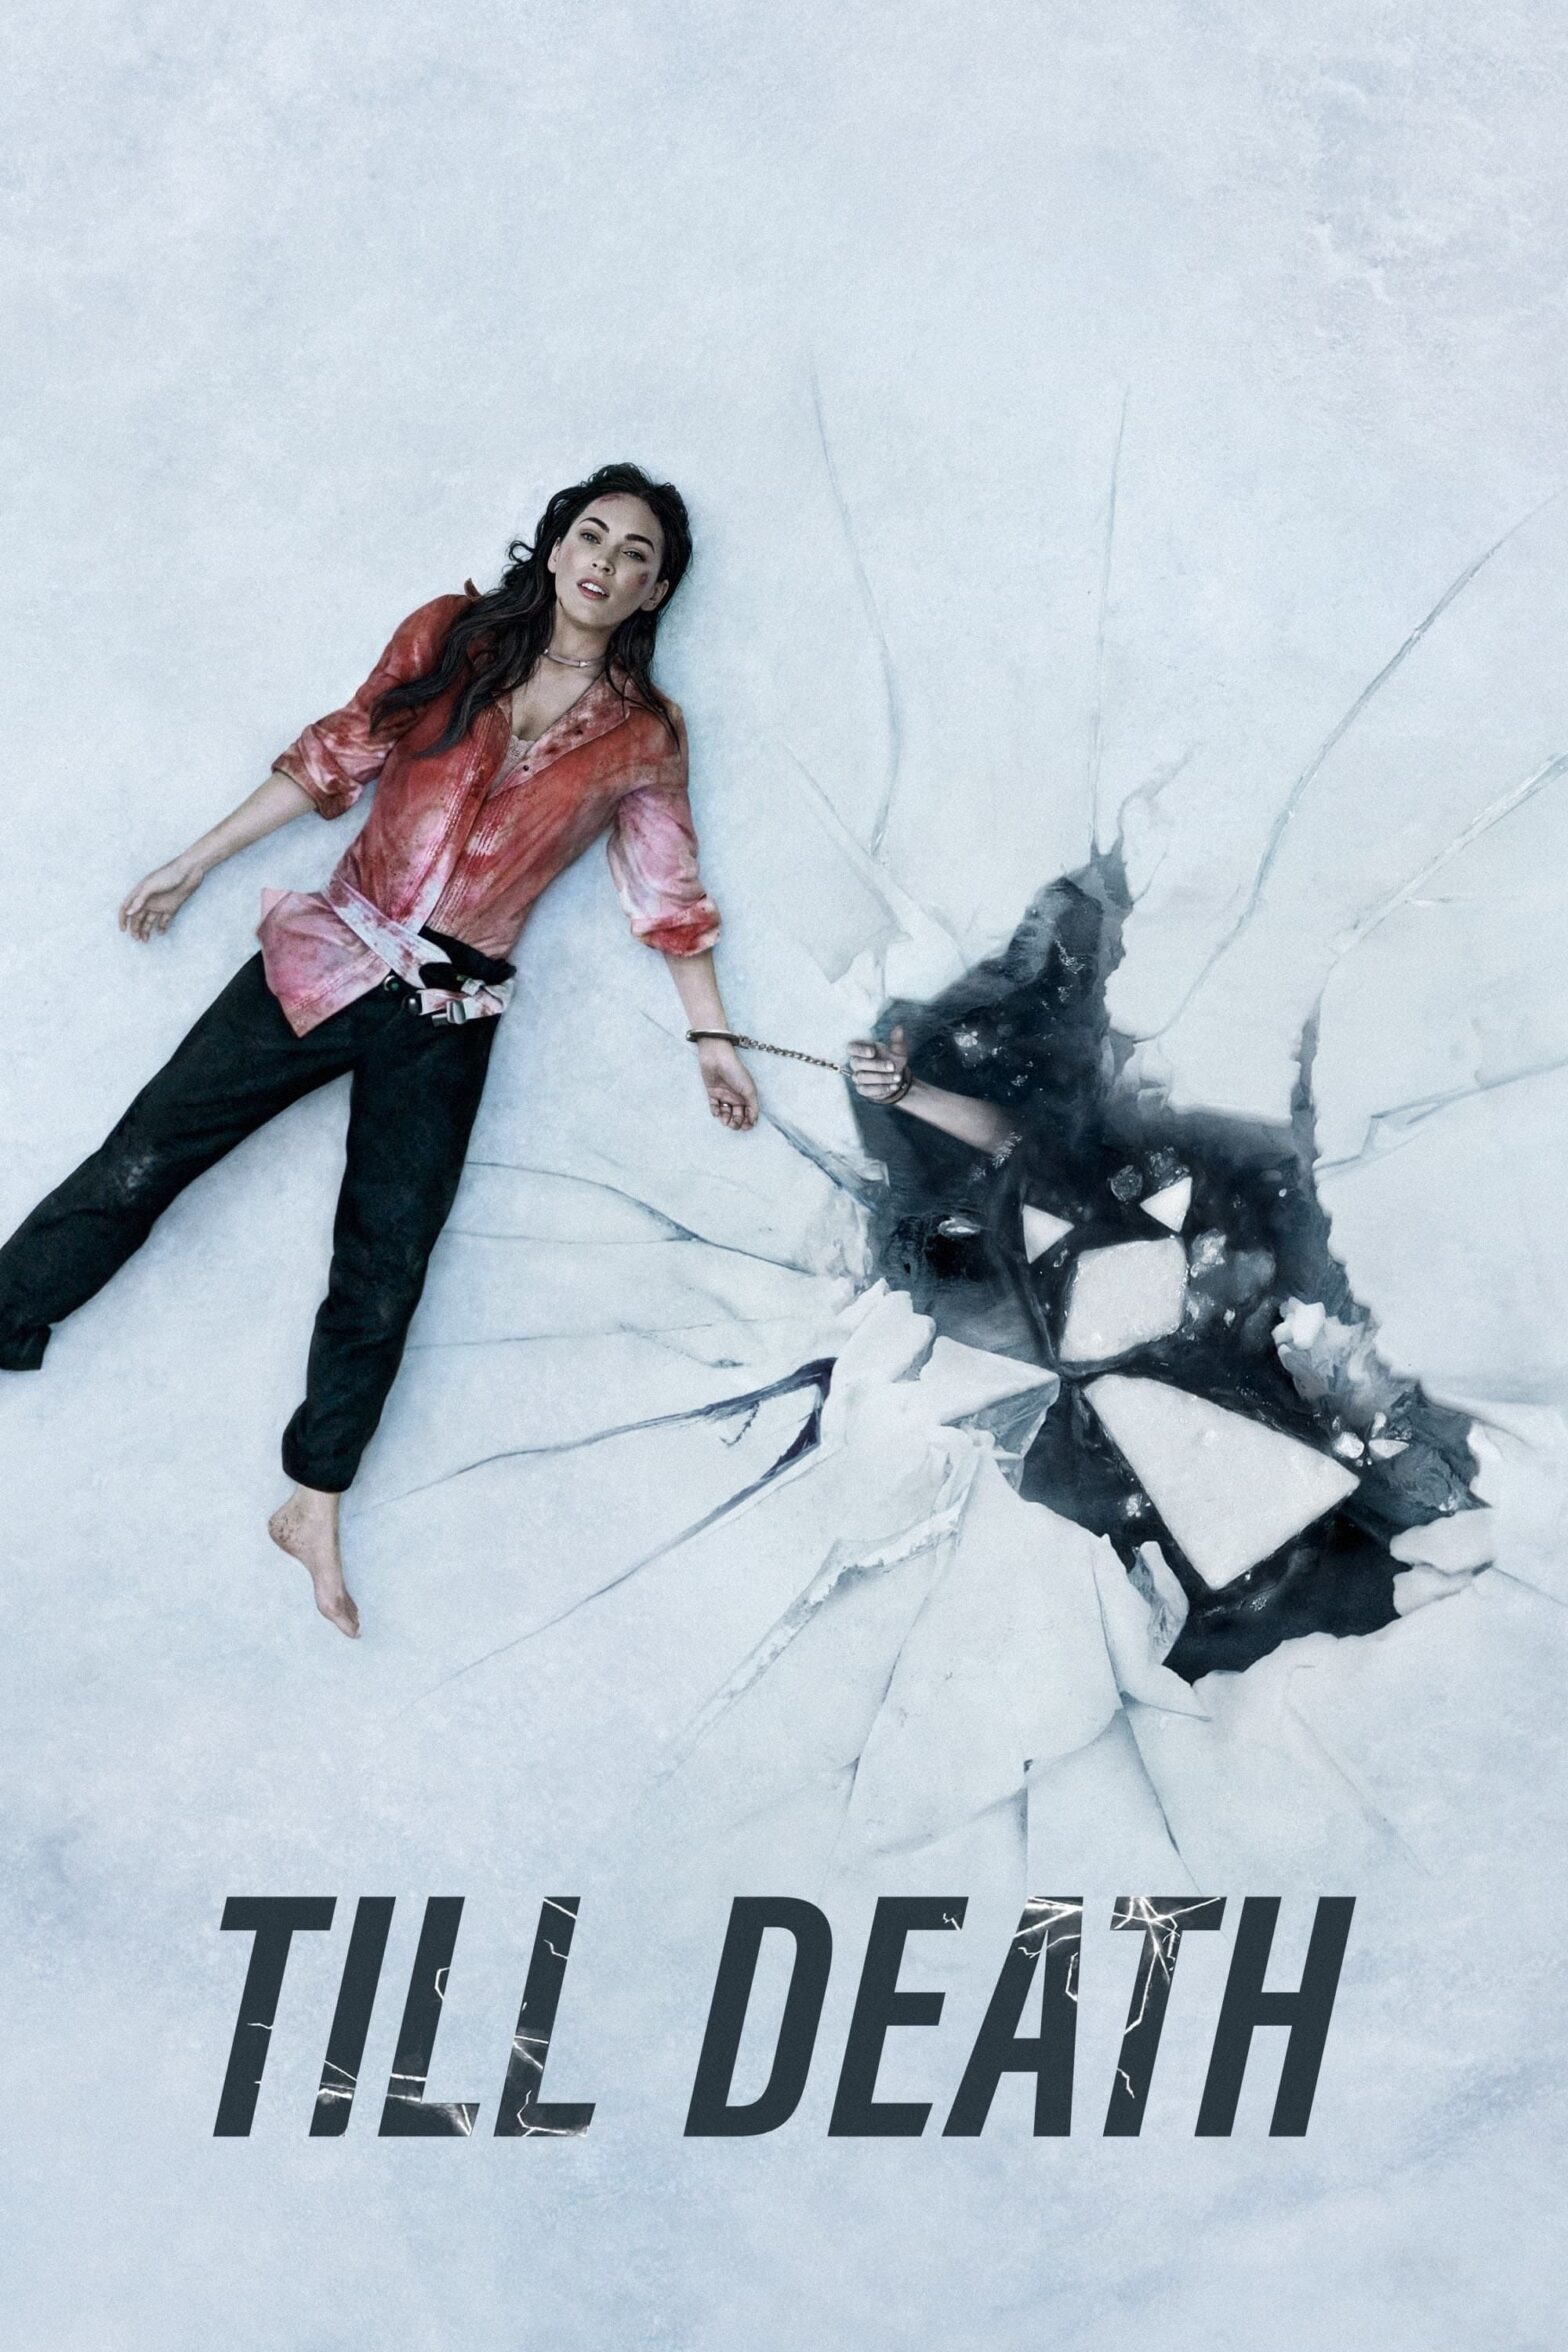 Poster for the movie "Till Death"